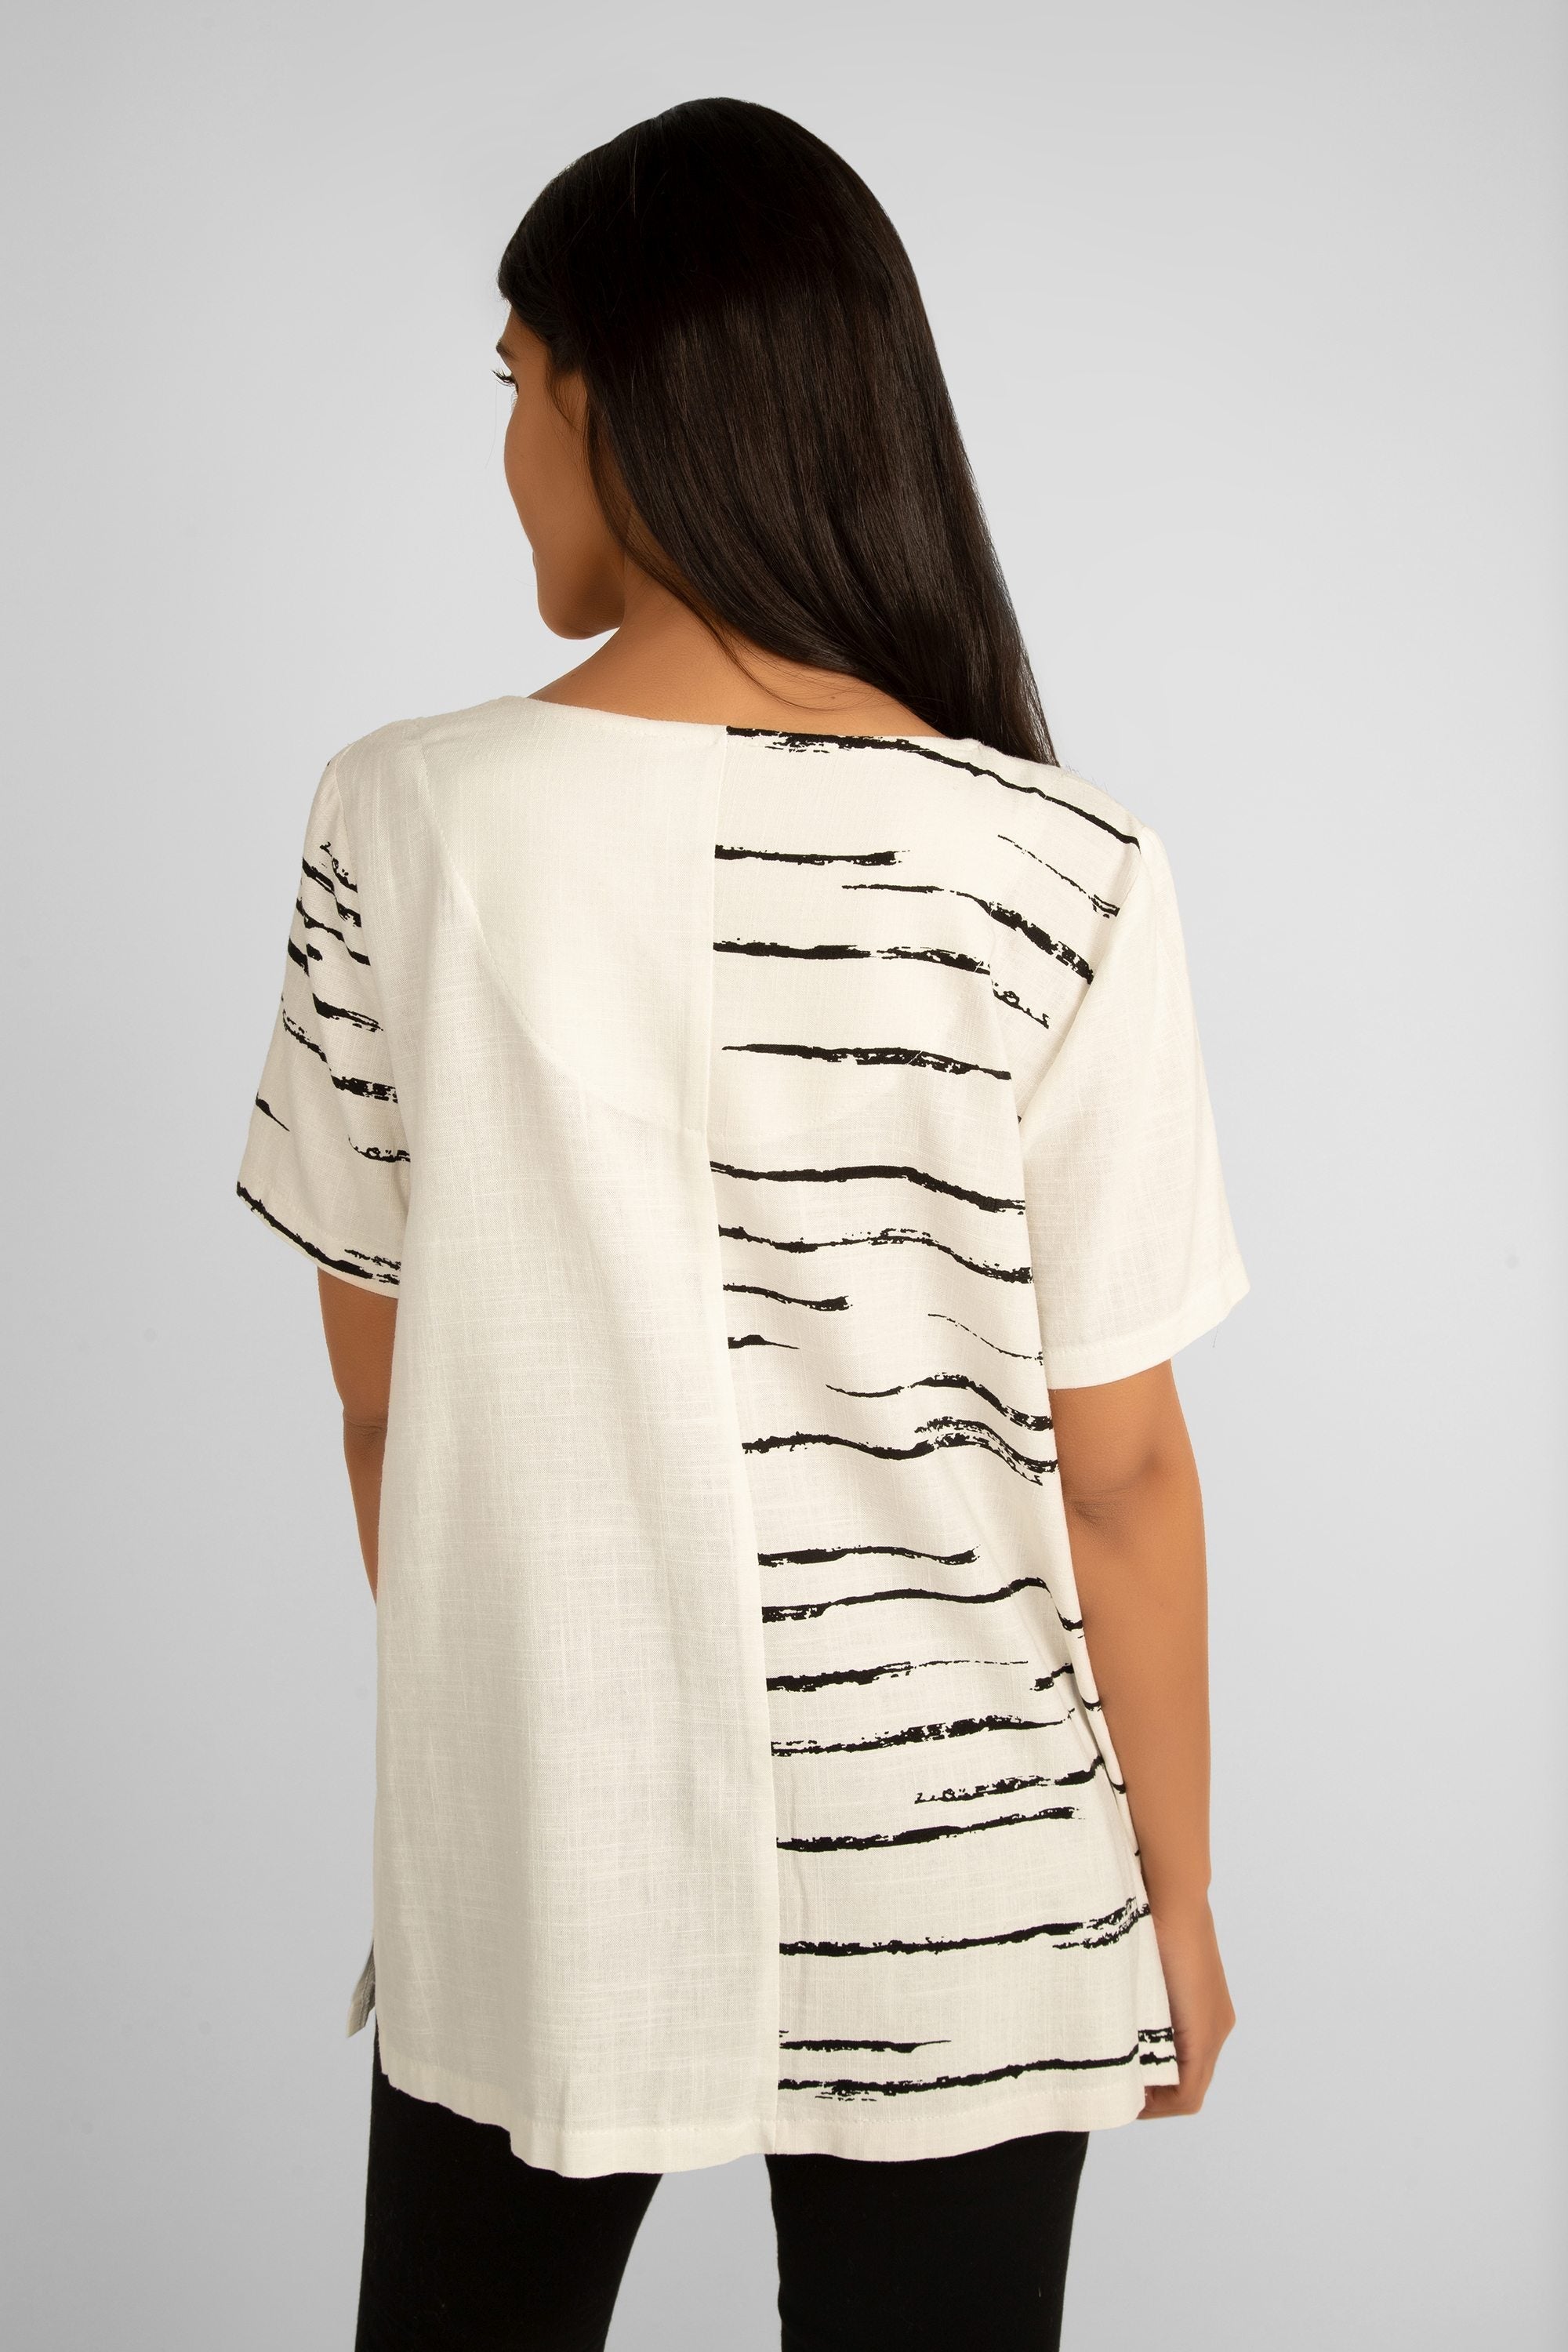 Compli K (33516) Women's Short Sleeve Top With Button V-Neck in White With Black Weathered Lines Print